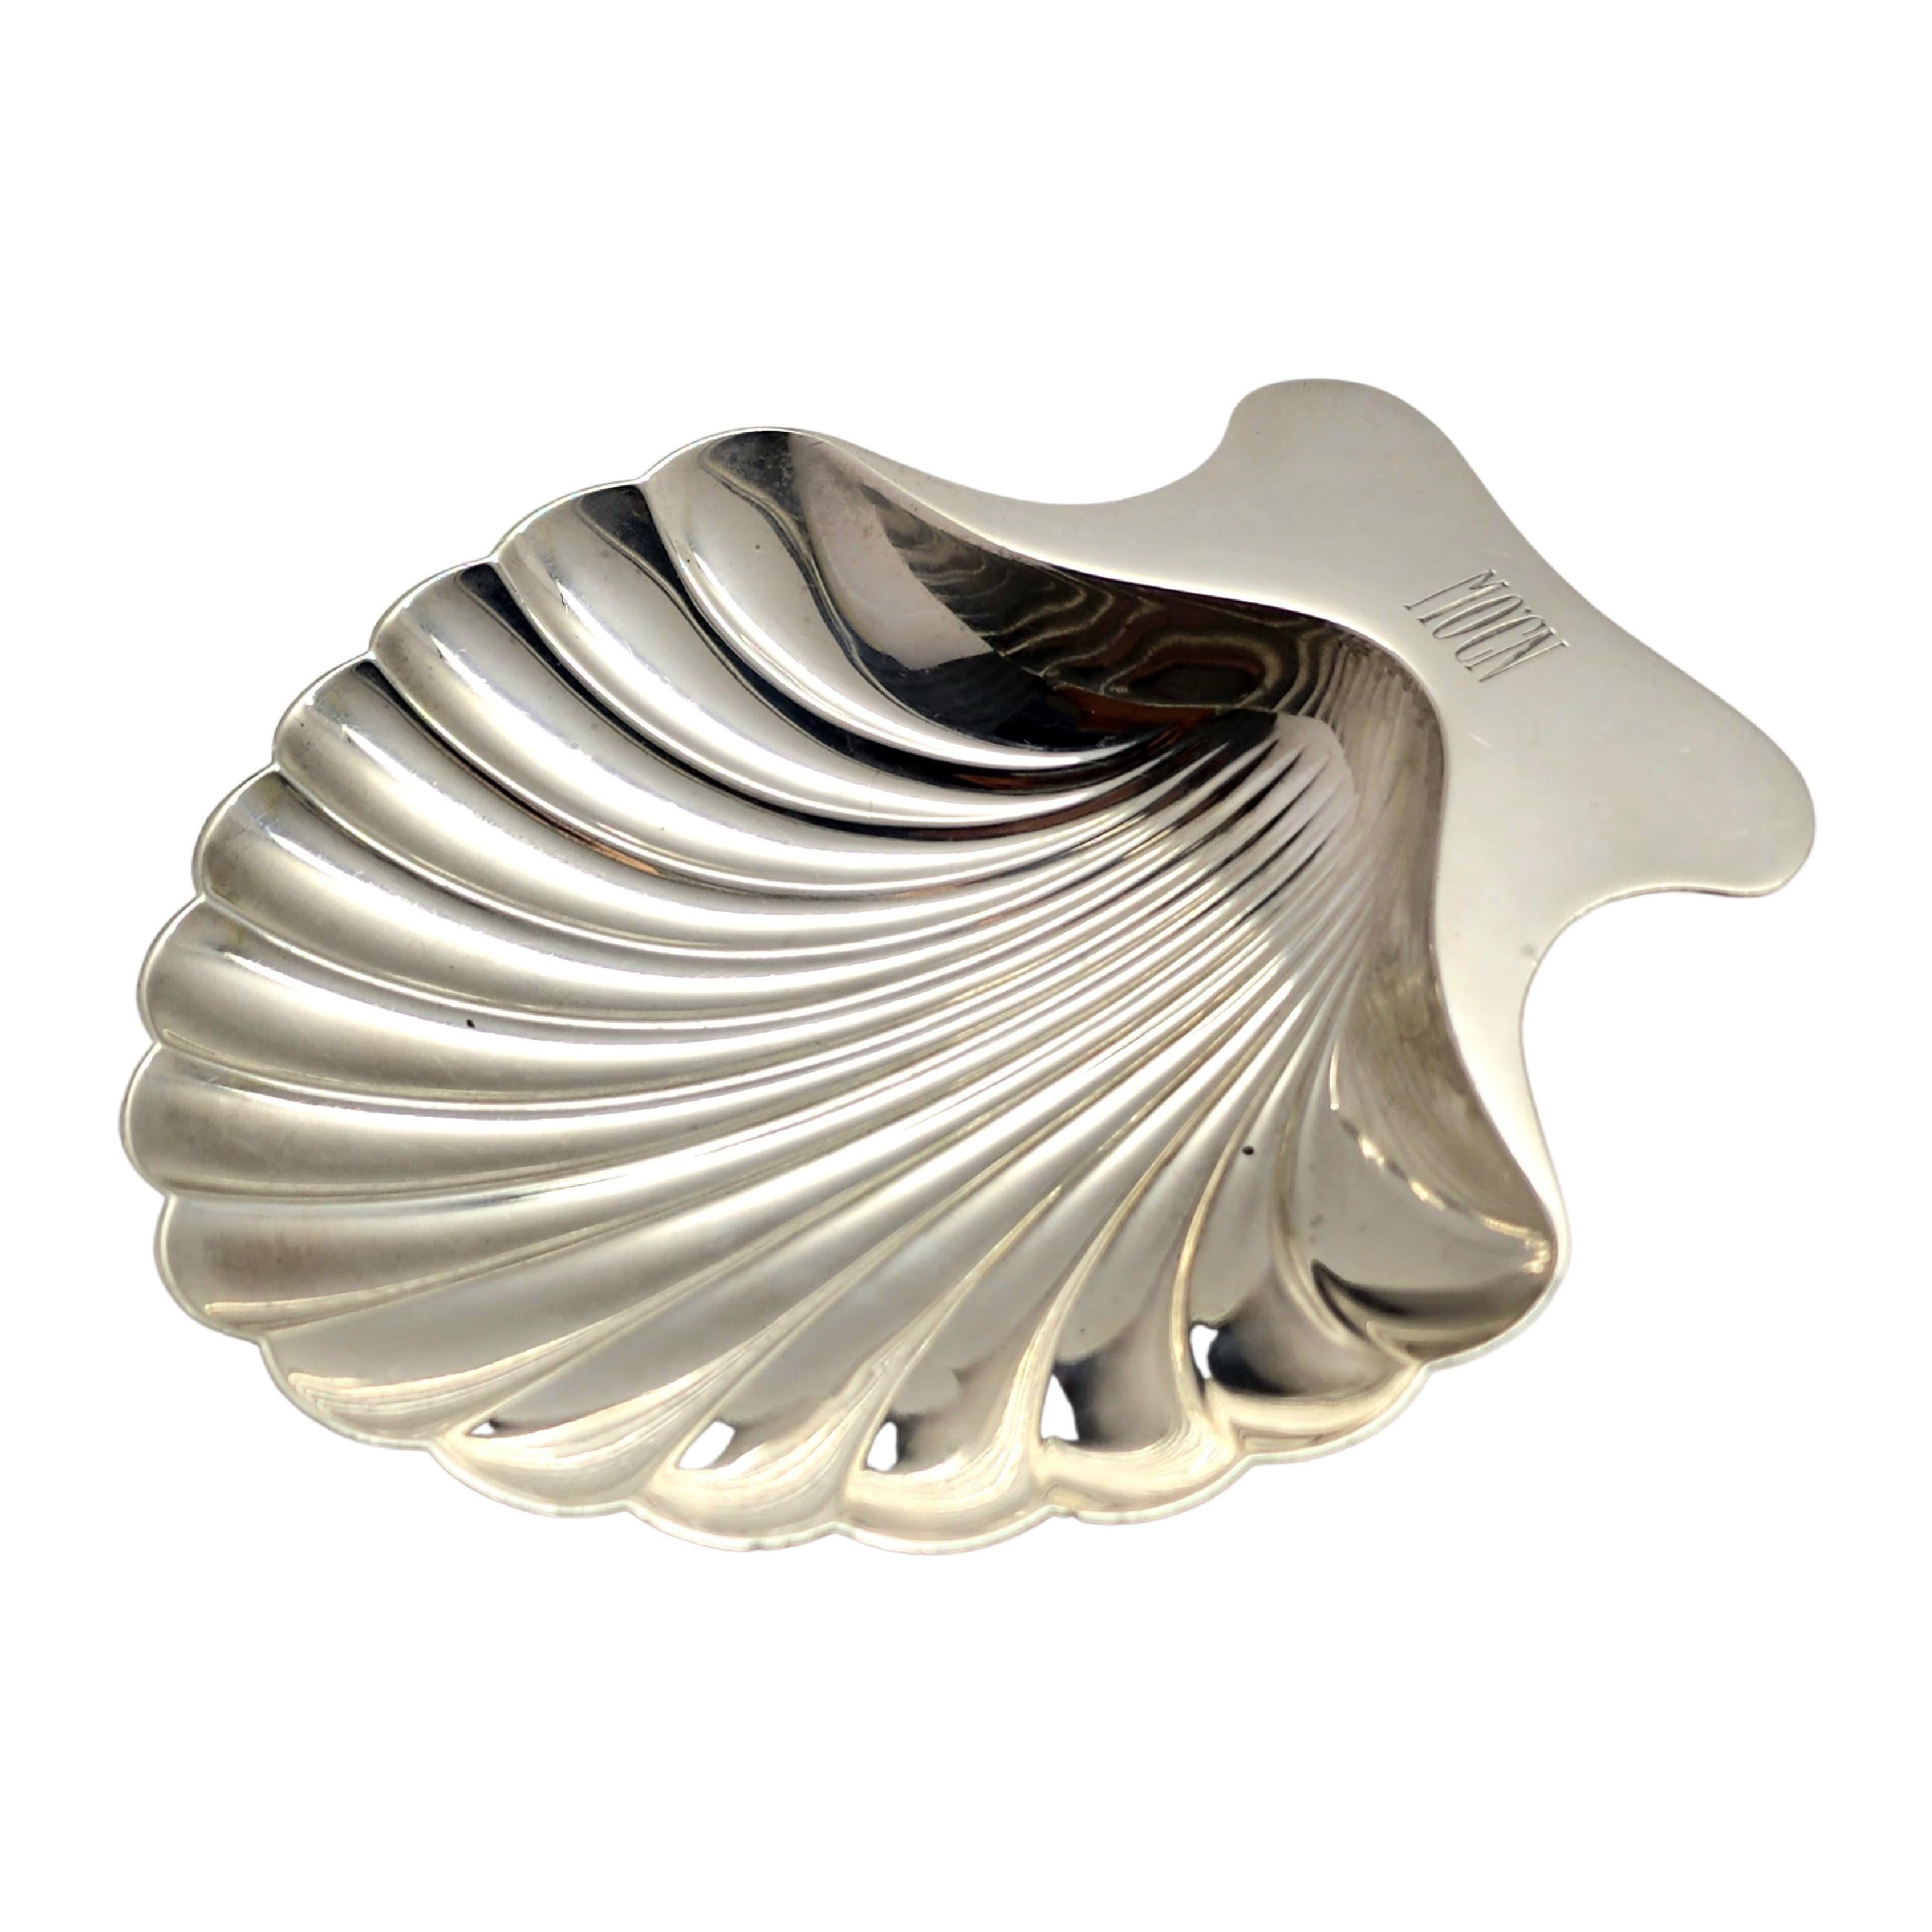 Tiffany & Co. Sterling Silver Scallop Shell Dish with Monogram 3